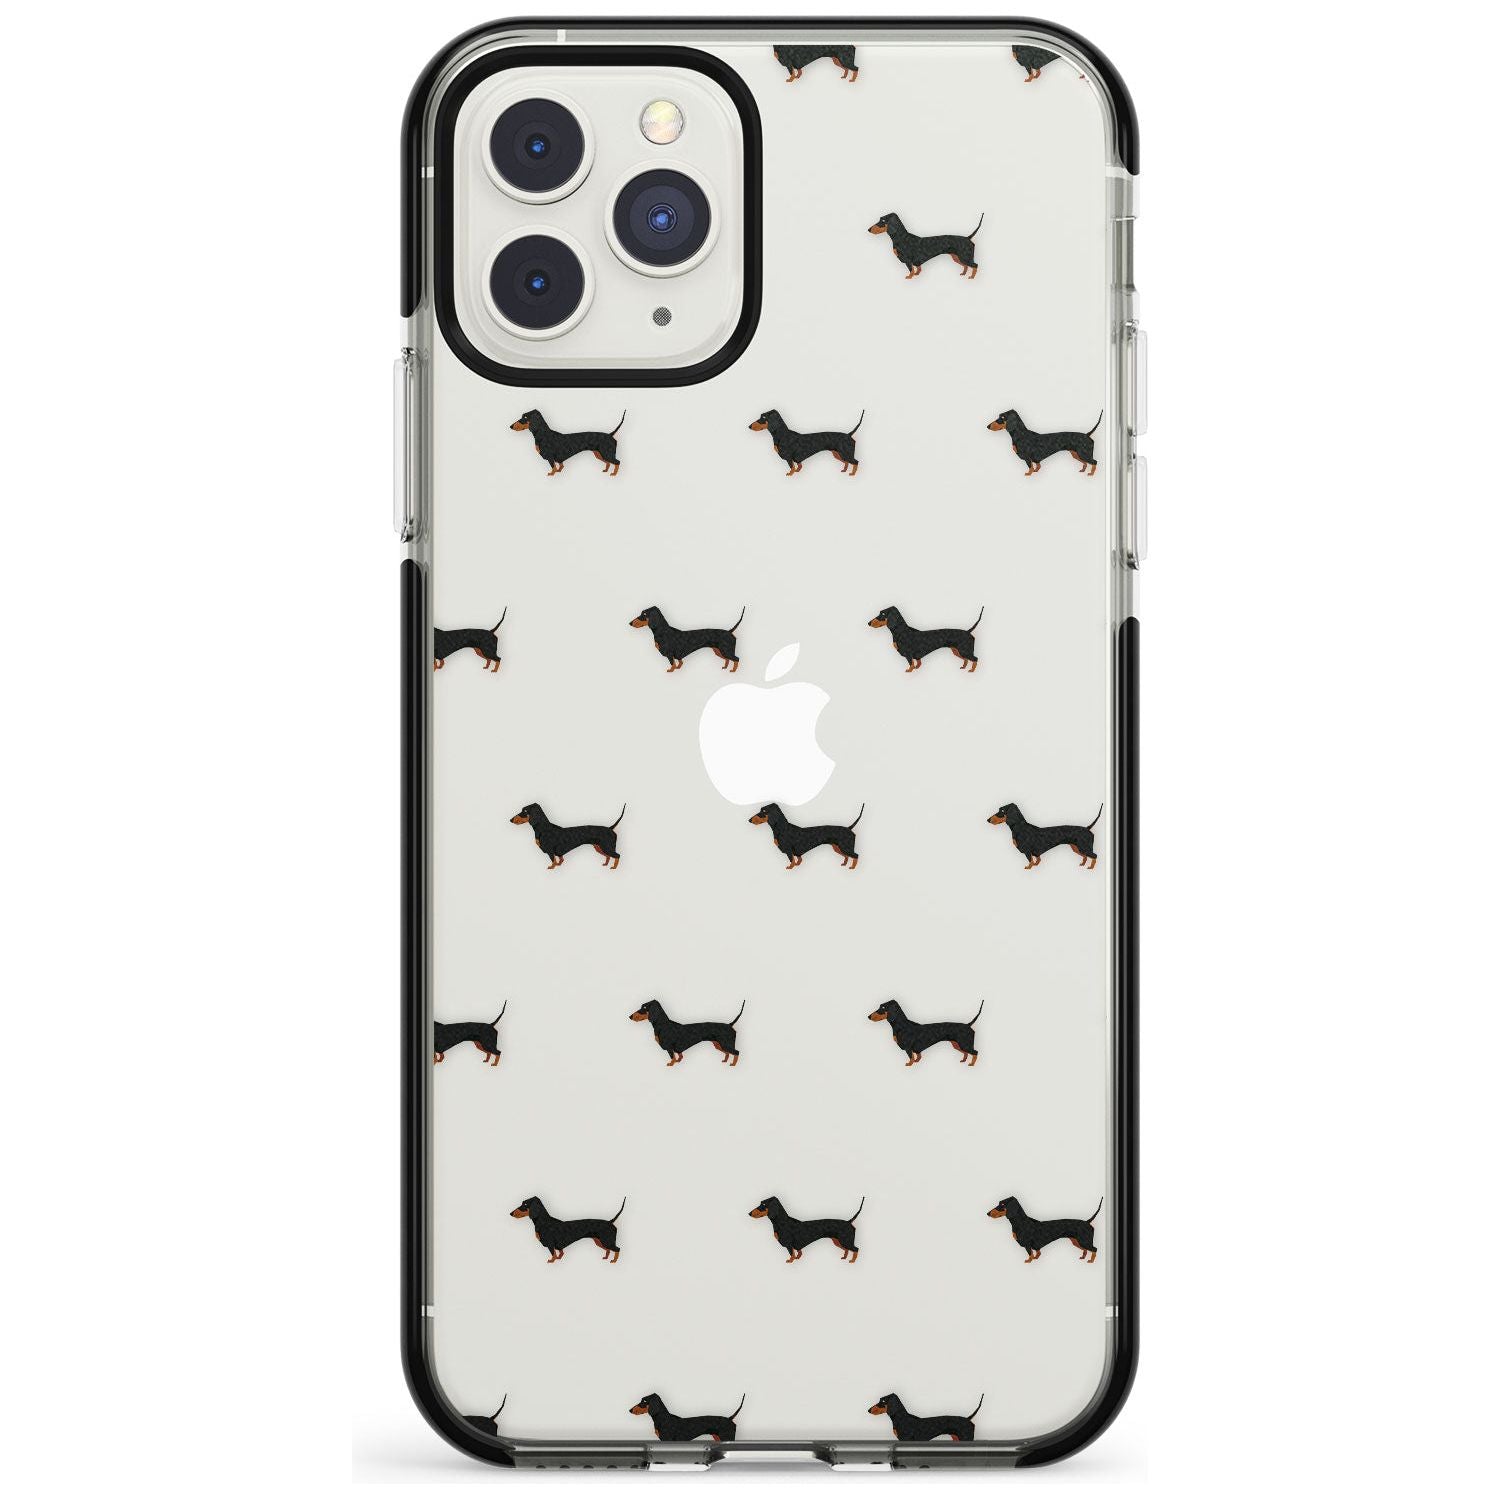 Dachshund Dog Pattern Clear Black Impact Phone Case for iPhone 11 Pro Max